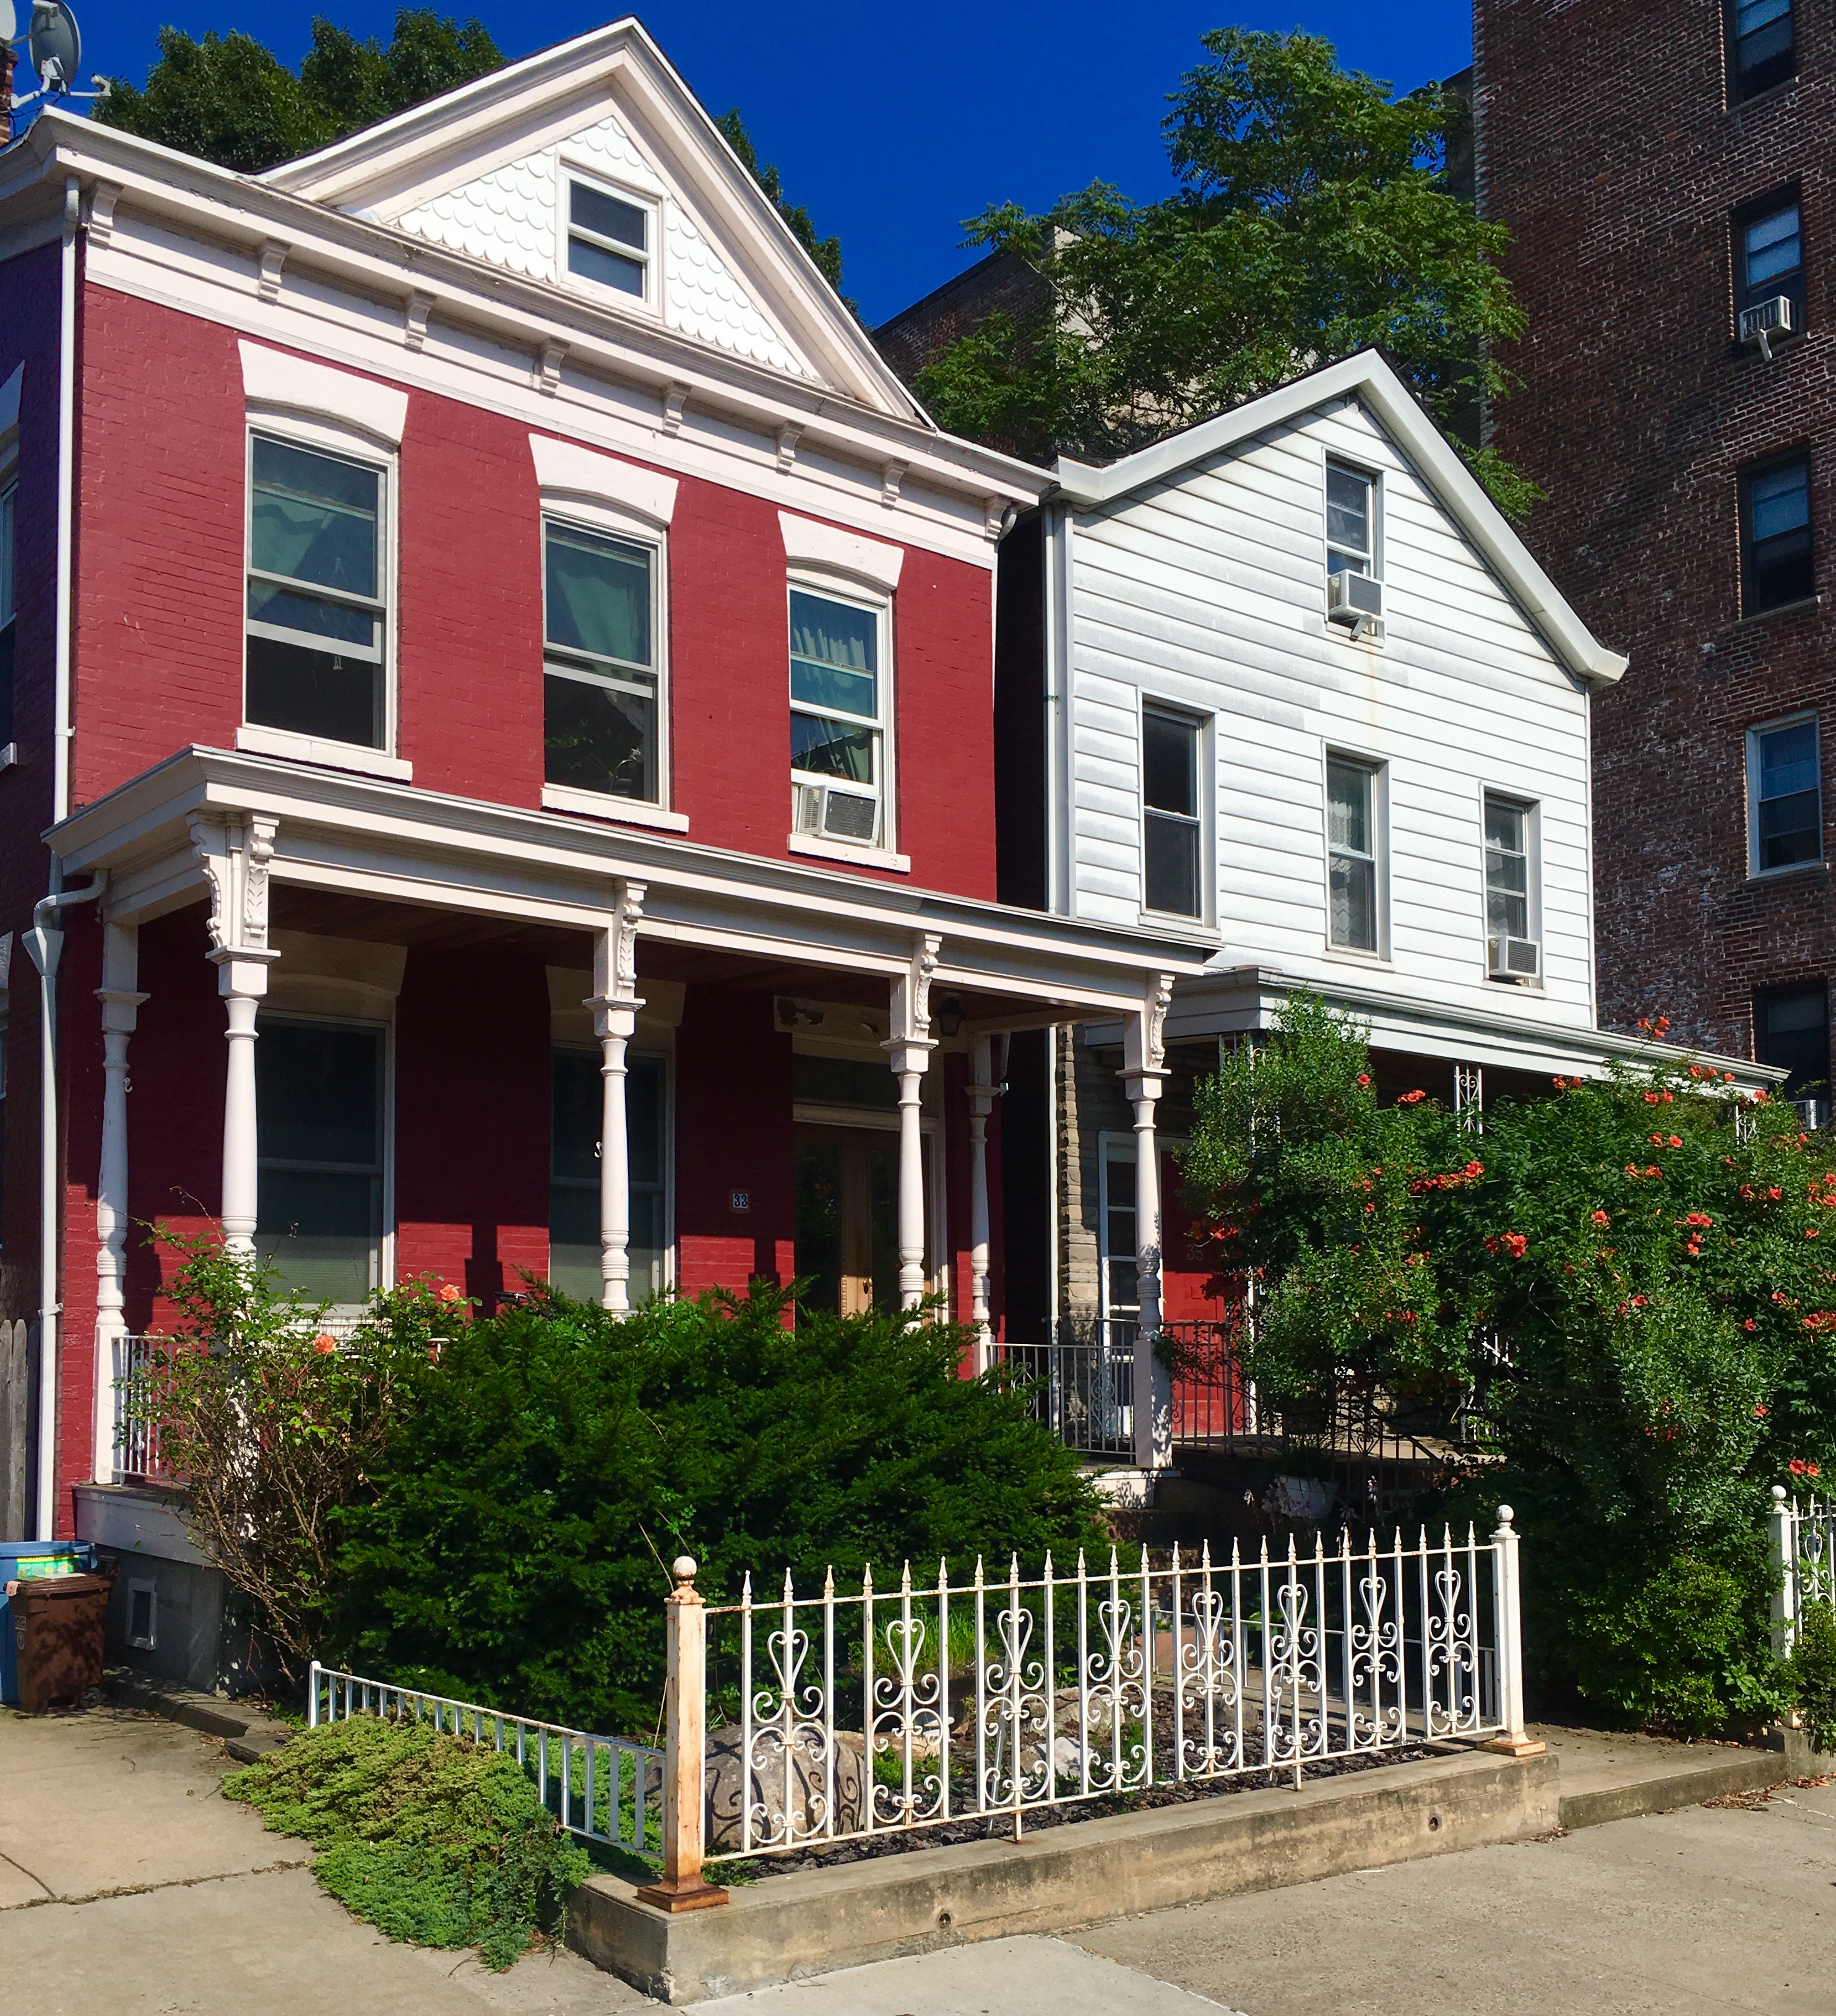 You can find these pretty porches on East 7th Street. Eagle photo by Lore Croghan